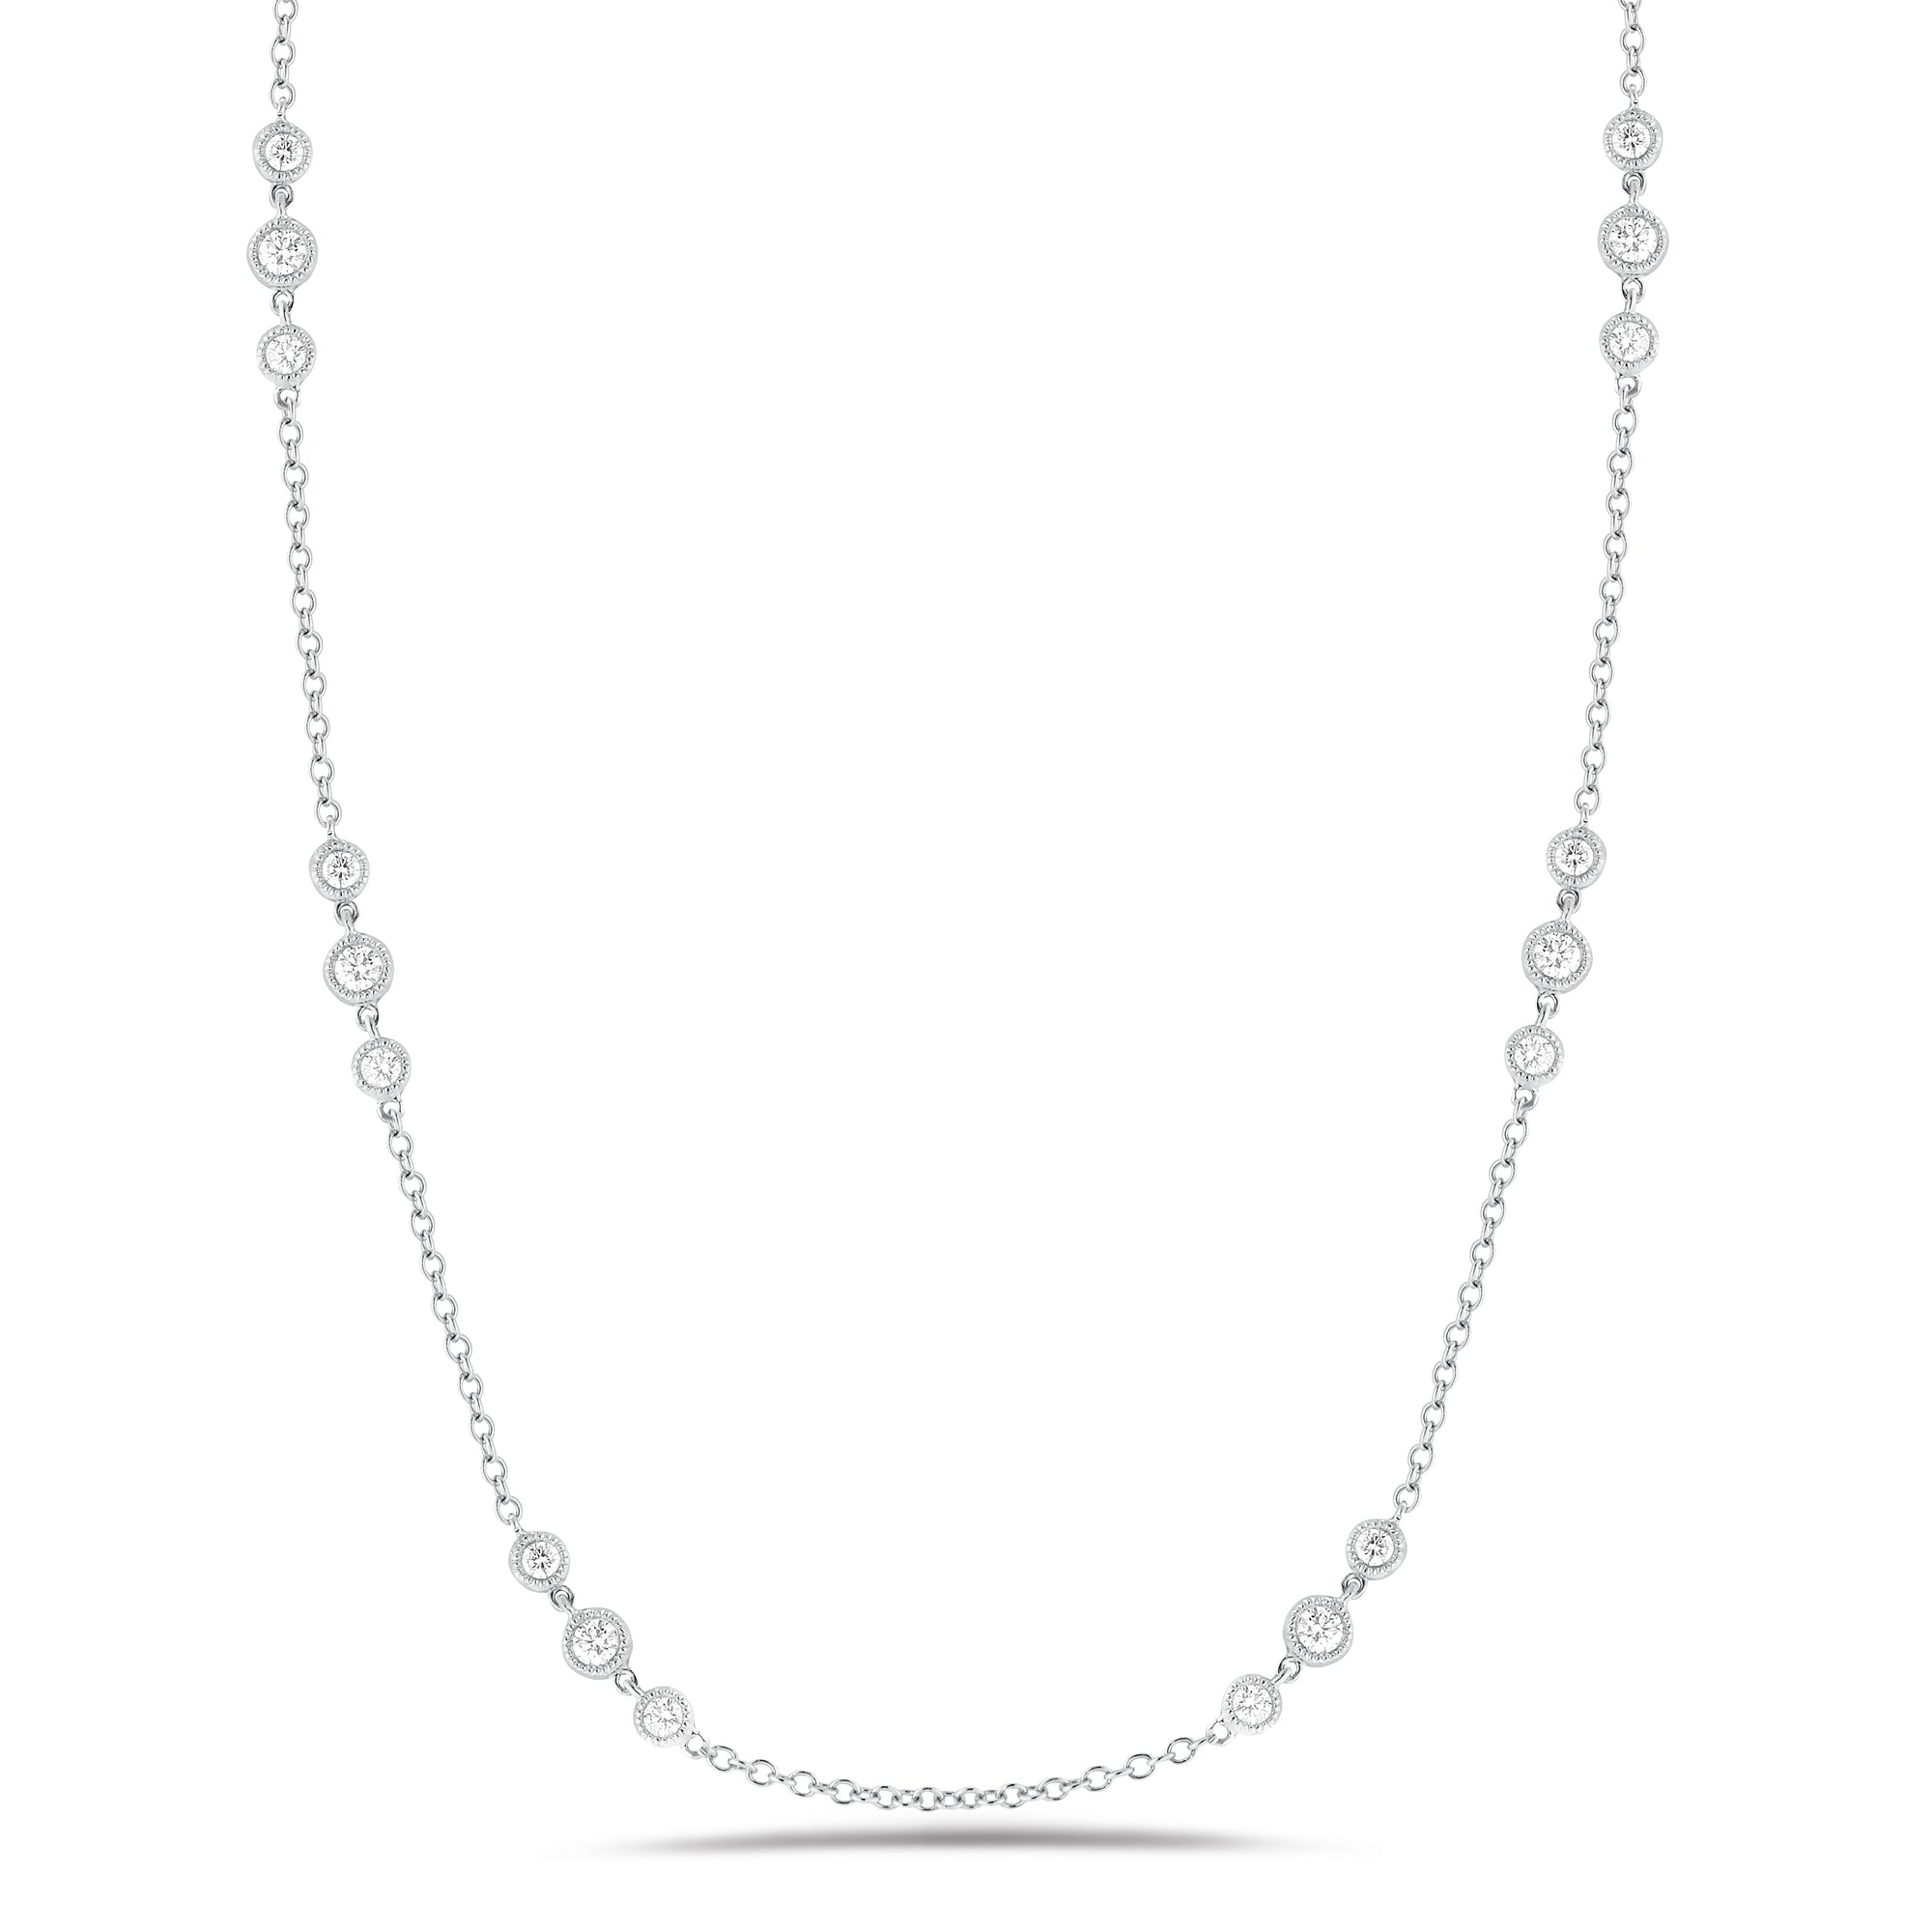 3 Station Diamond by the Yard Necklace with Antique Milgrain  18k white gold, 5.14 grams, 24 round diamonds 1.19 carats.